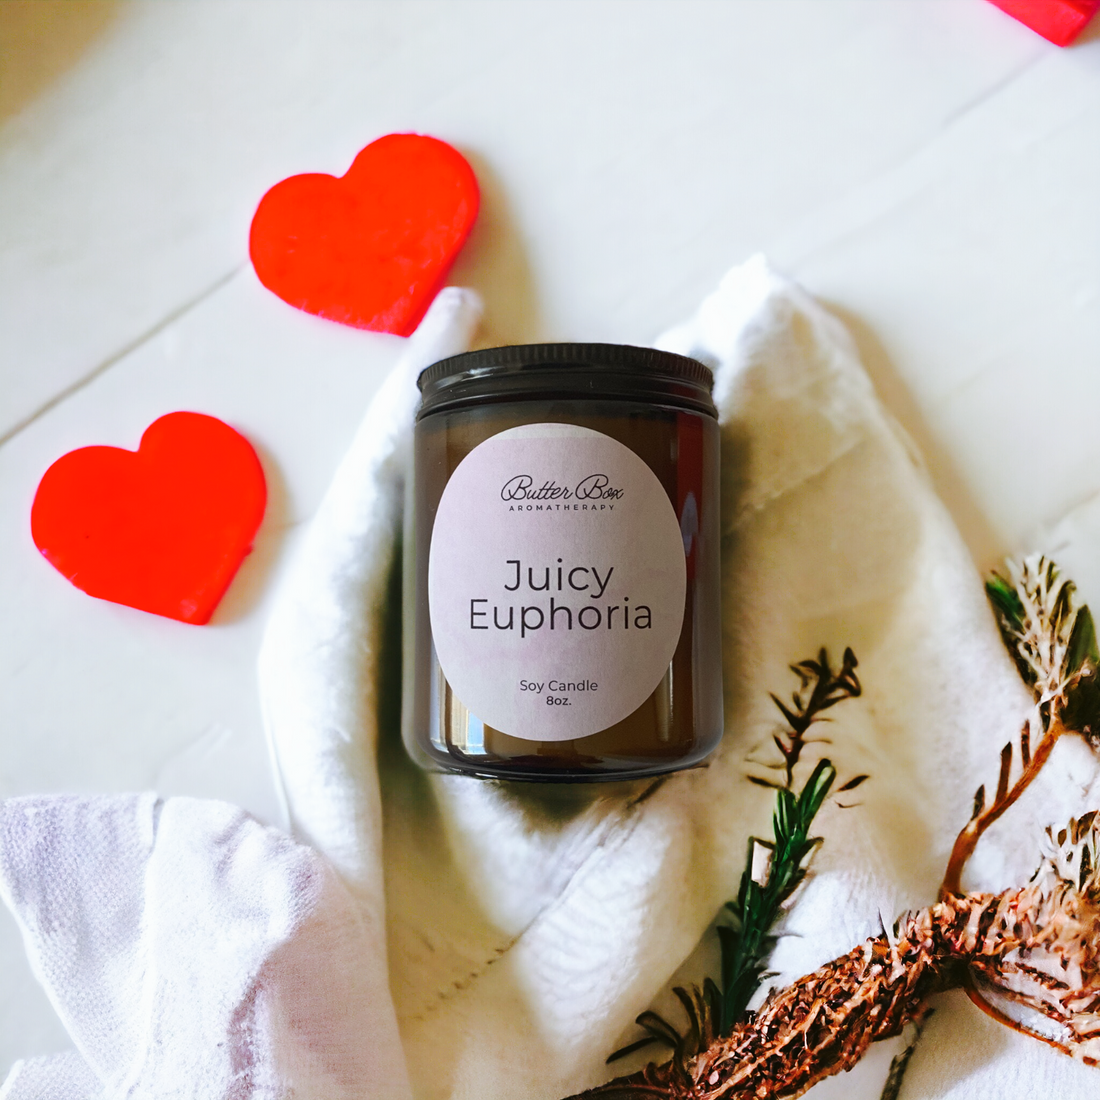 two red hearts with Juicy Euphoria candle jar with white cloth underneath